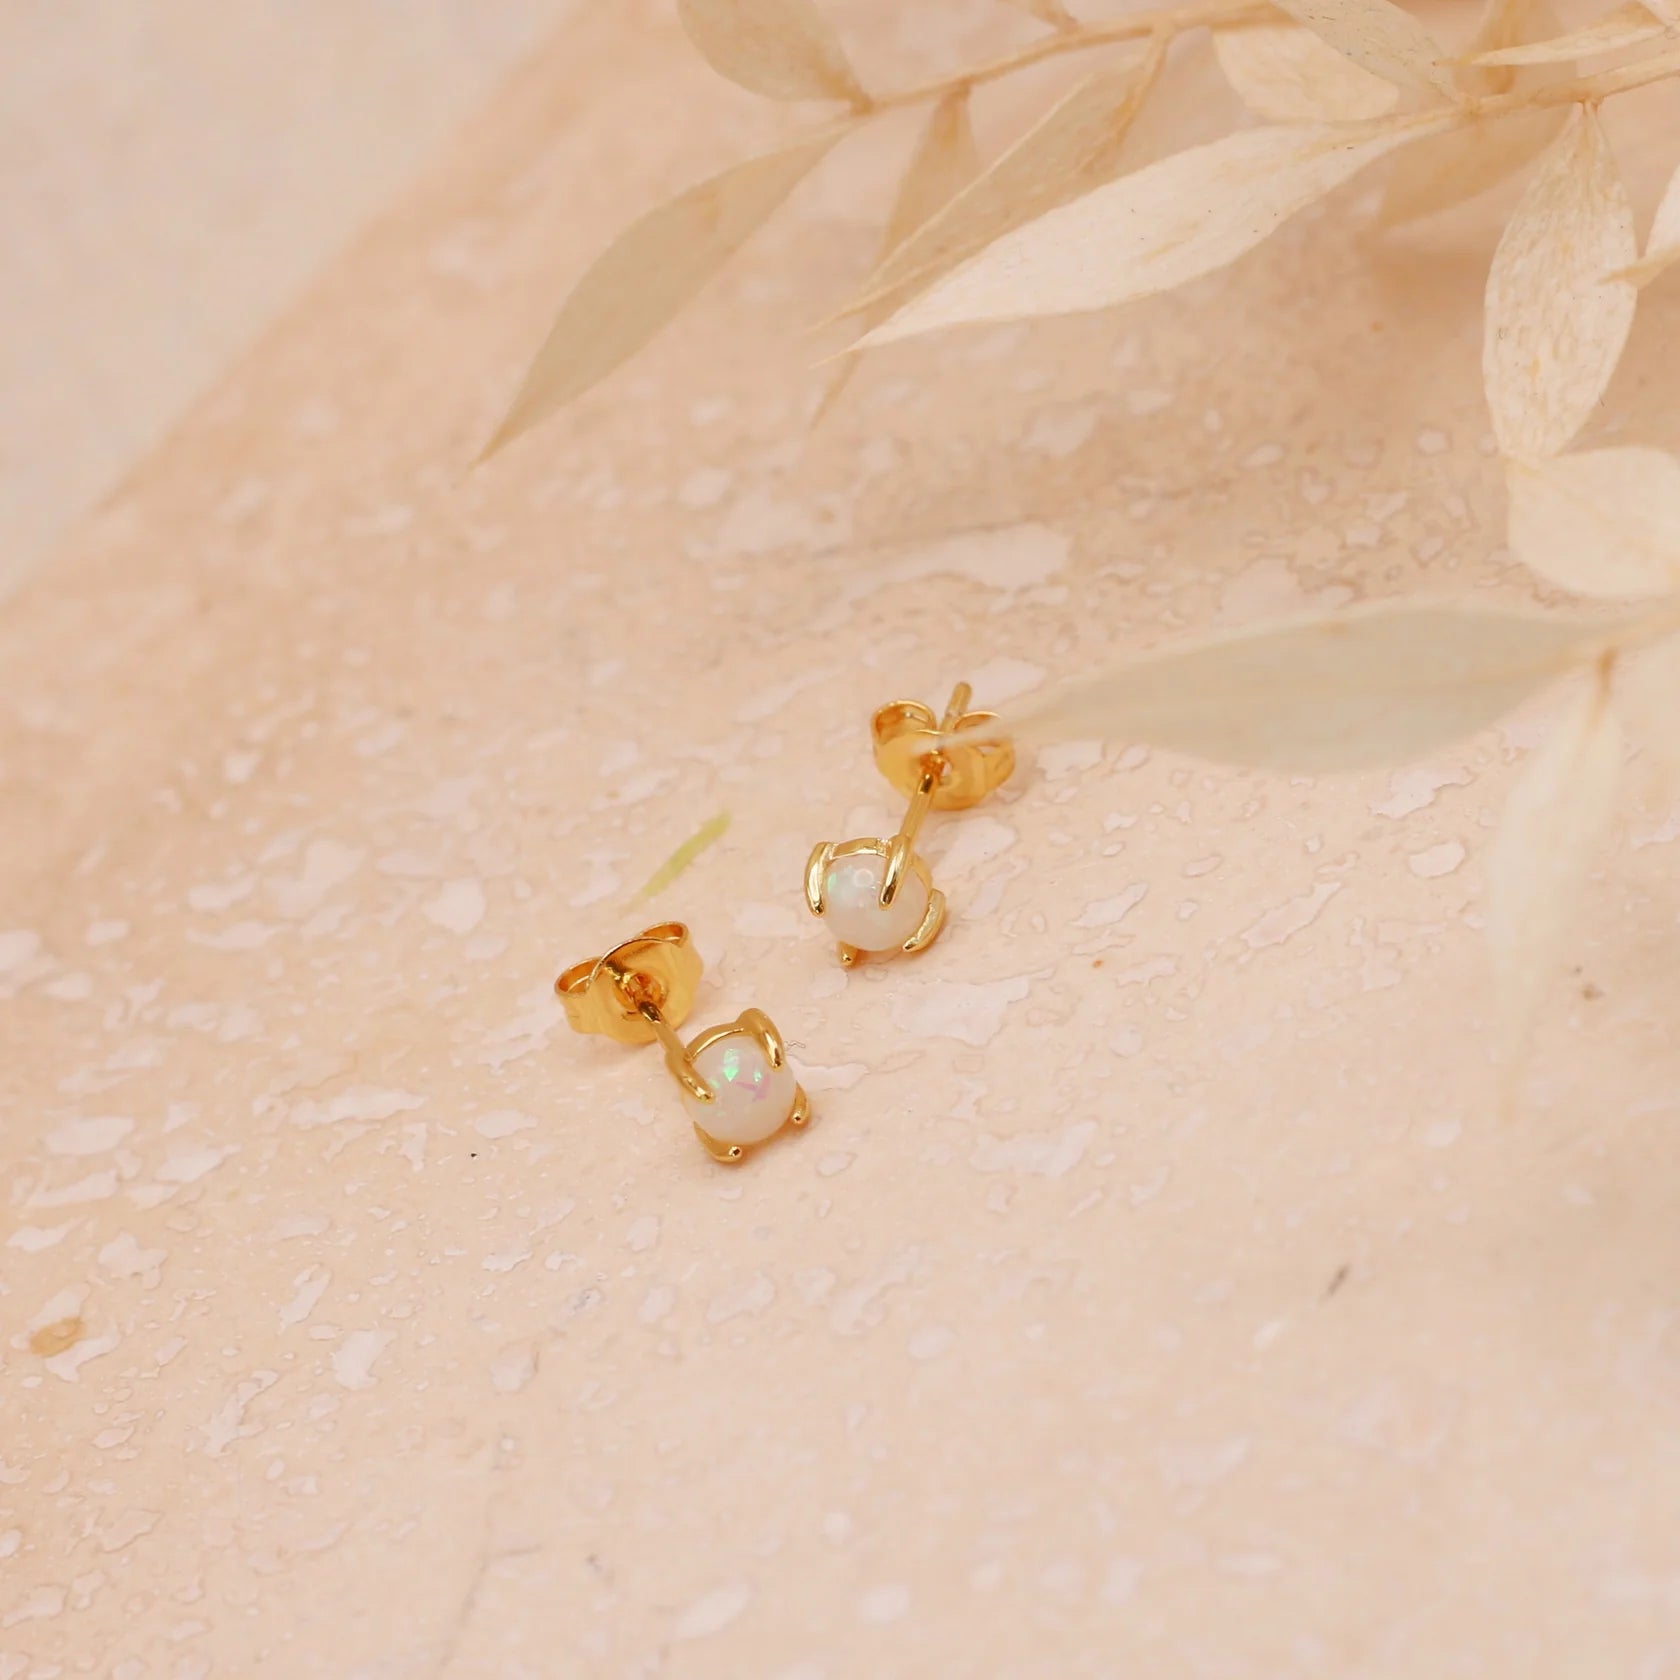 Two small gold stud earrings with Opal stones